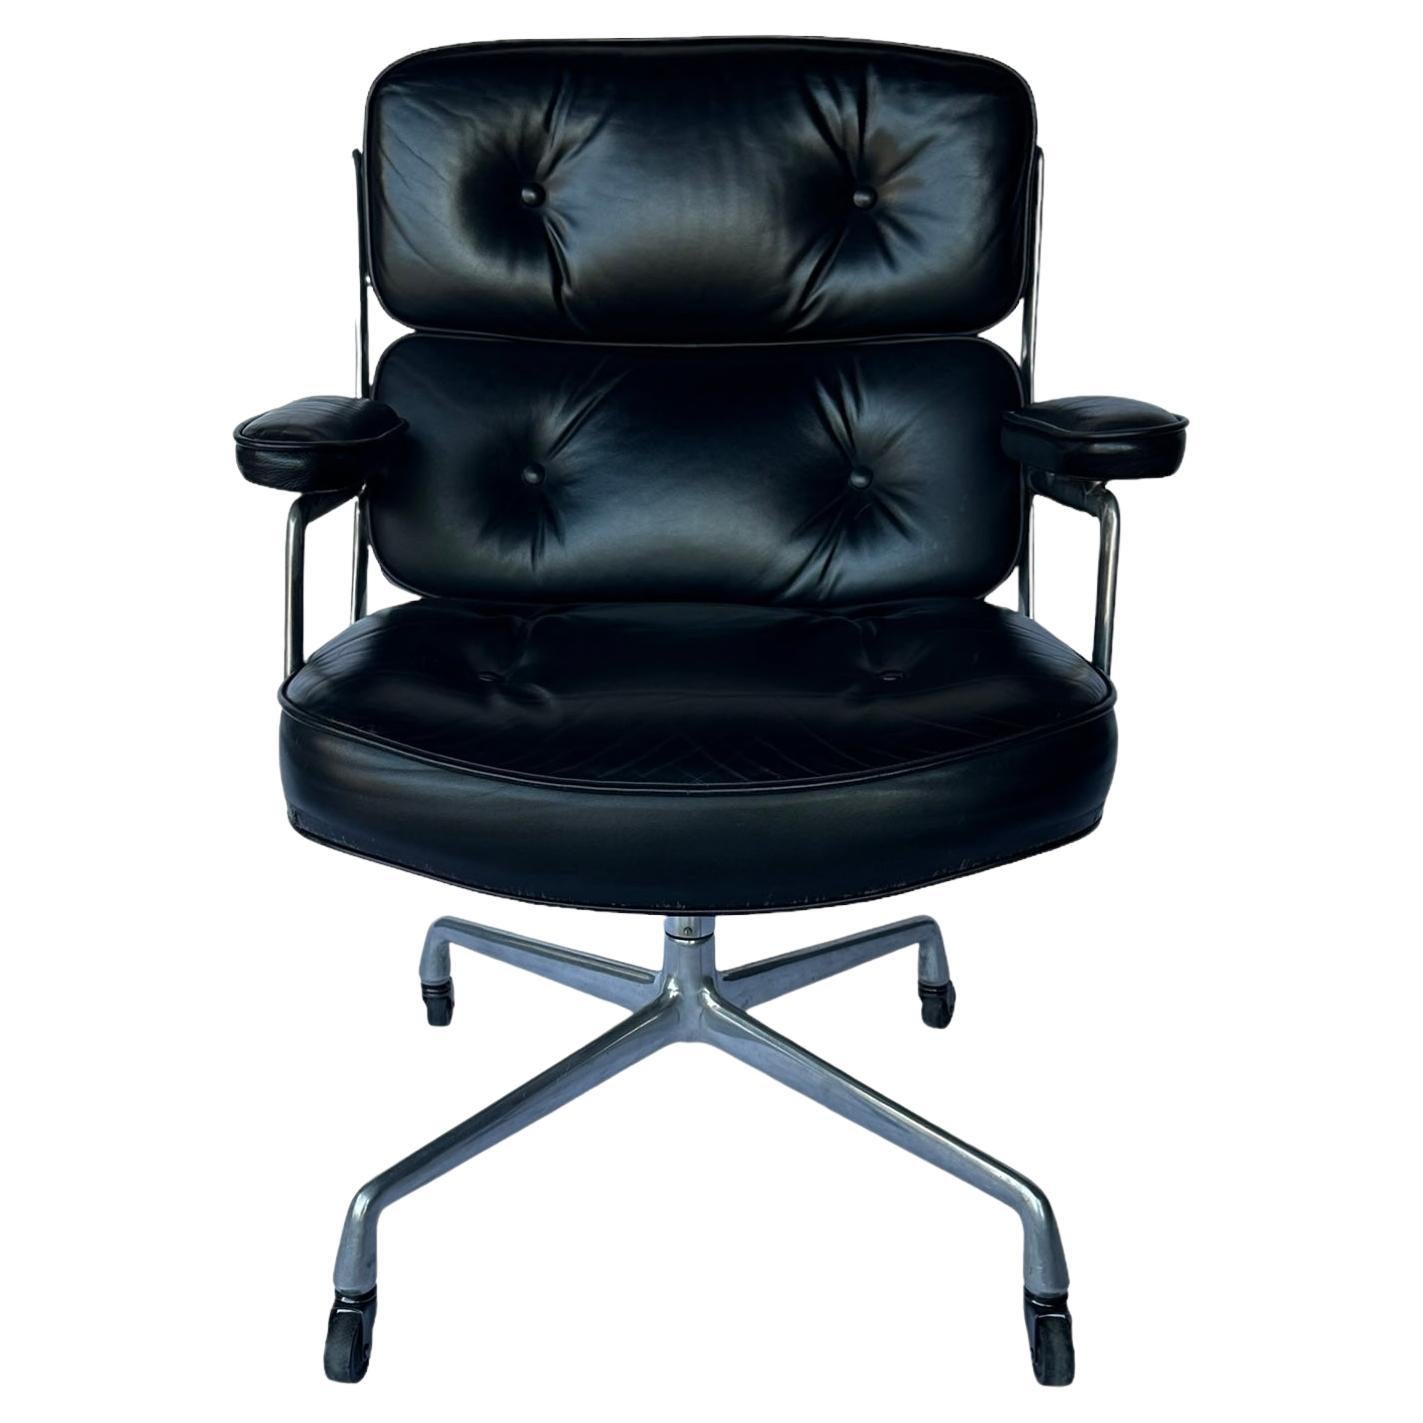 Eames Time Life Office Desk Chair in Black Leather